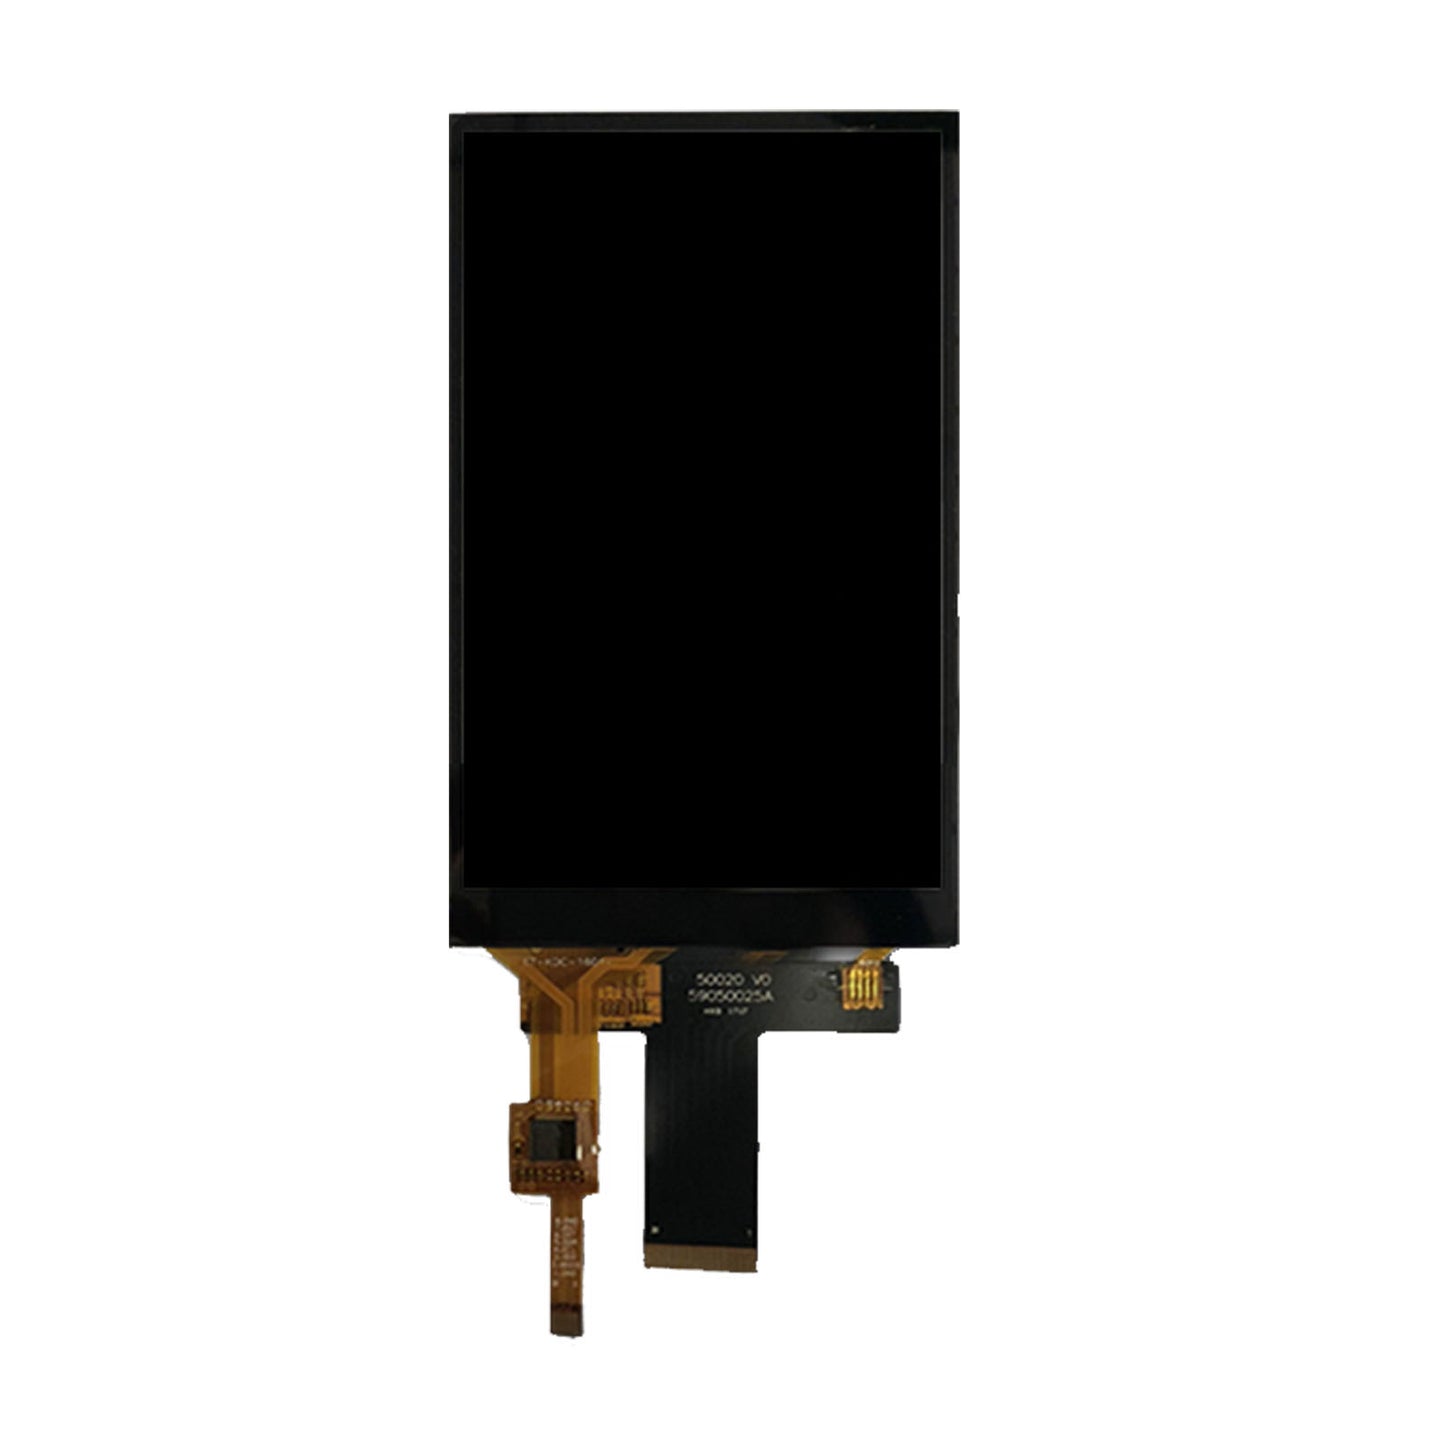 5-inch IPS display panel with 720x1280 resolution, featuring capacitive touch and a MIPI connection